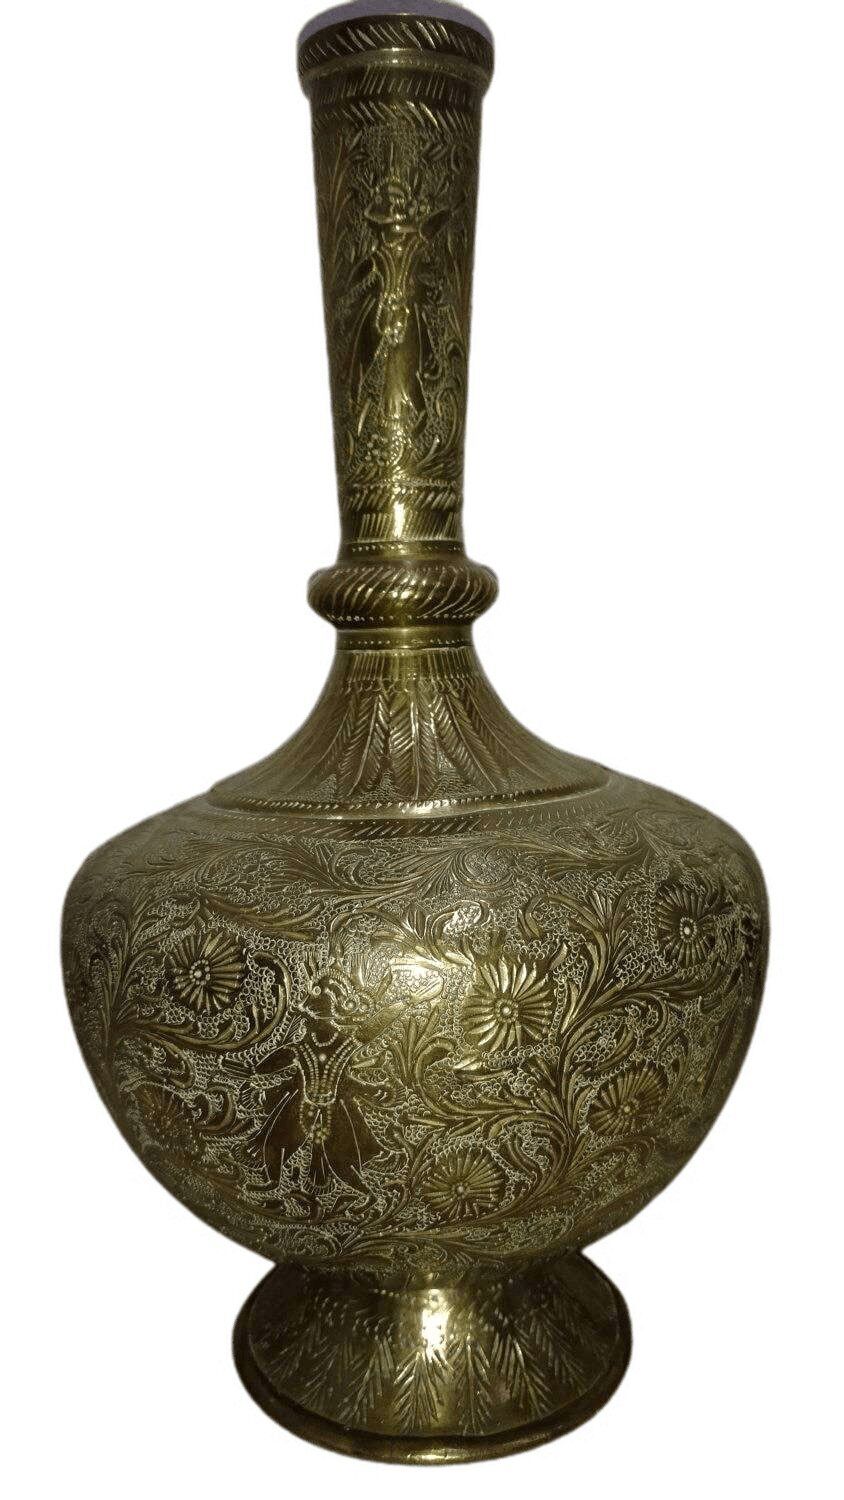 Ornate Antique Hand Engraved Brass Hookah Base Early 19th Century Hand Made Bras